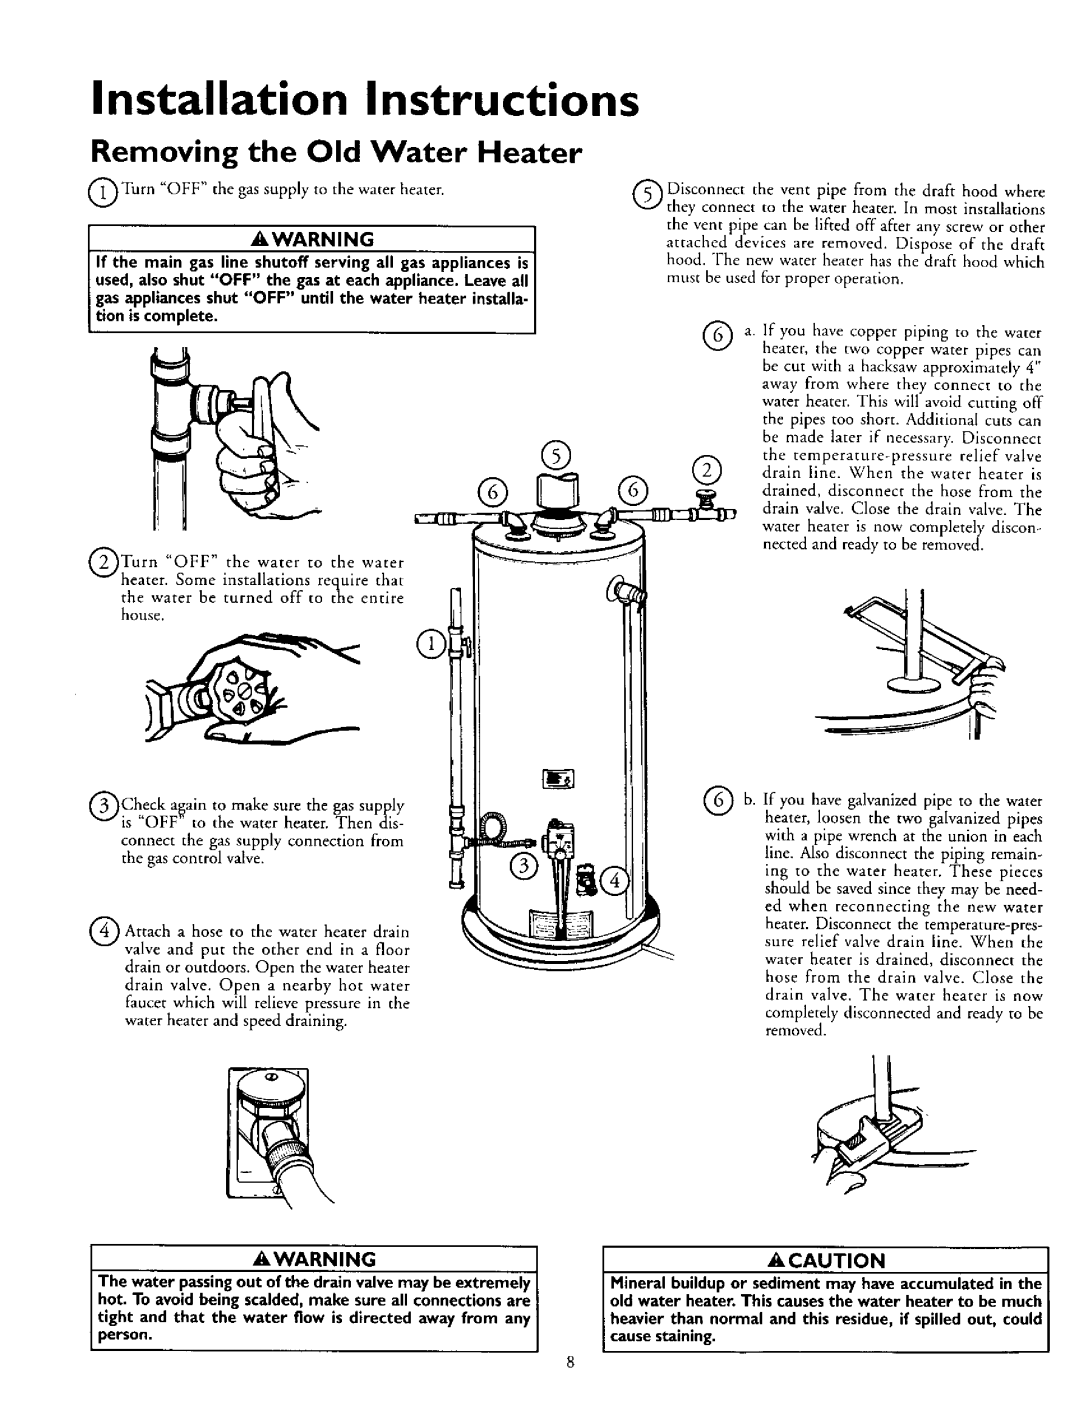 Kenmore 153.330402, 153.330502, 153.330752, 153.330552 Installation Instructions, Removing the Old Water Heater, Cautioni 